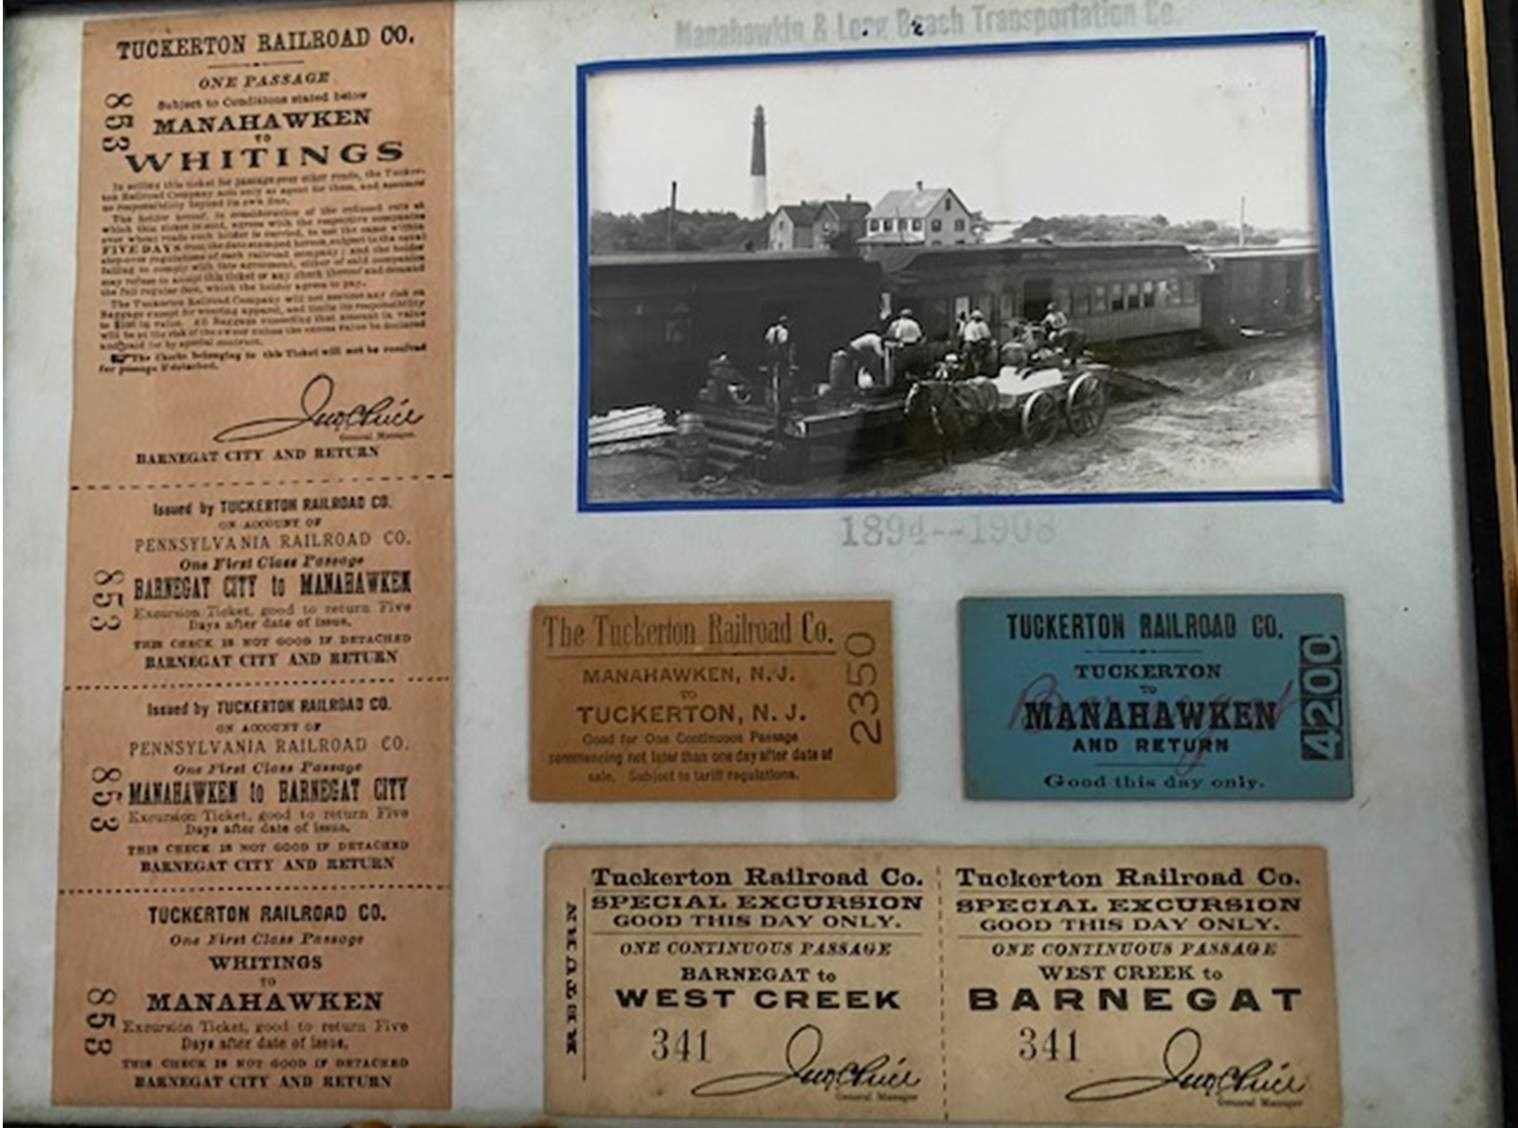 Tuckerton Railroad paraphernalia, including round trip tickets and workers loading fish onto a train.